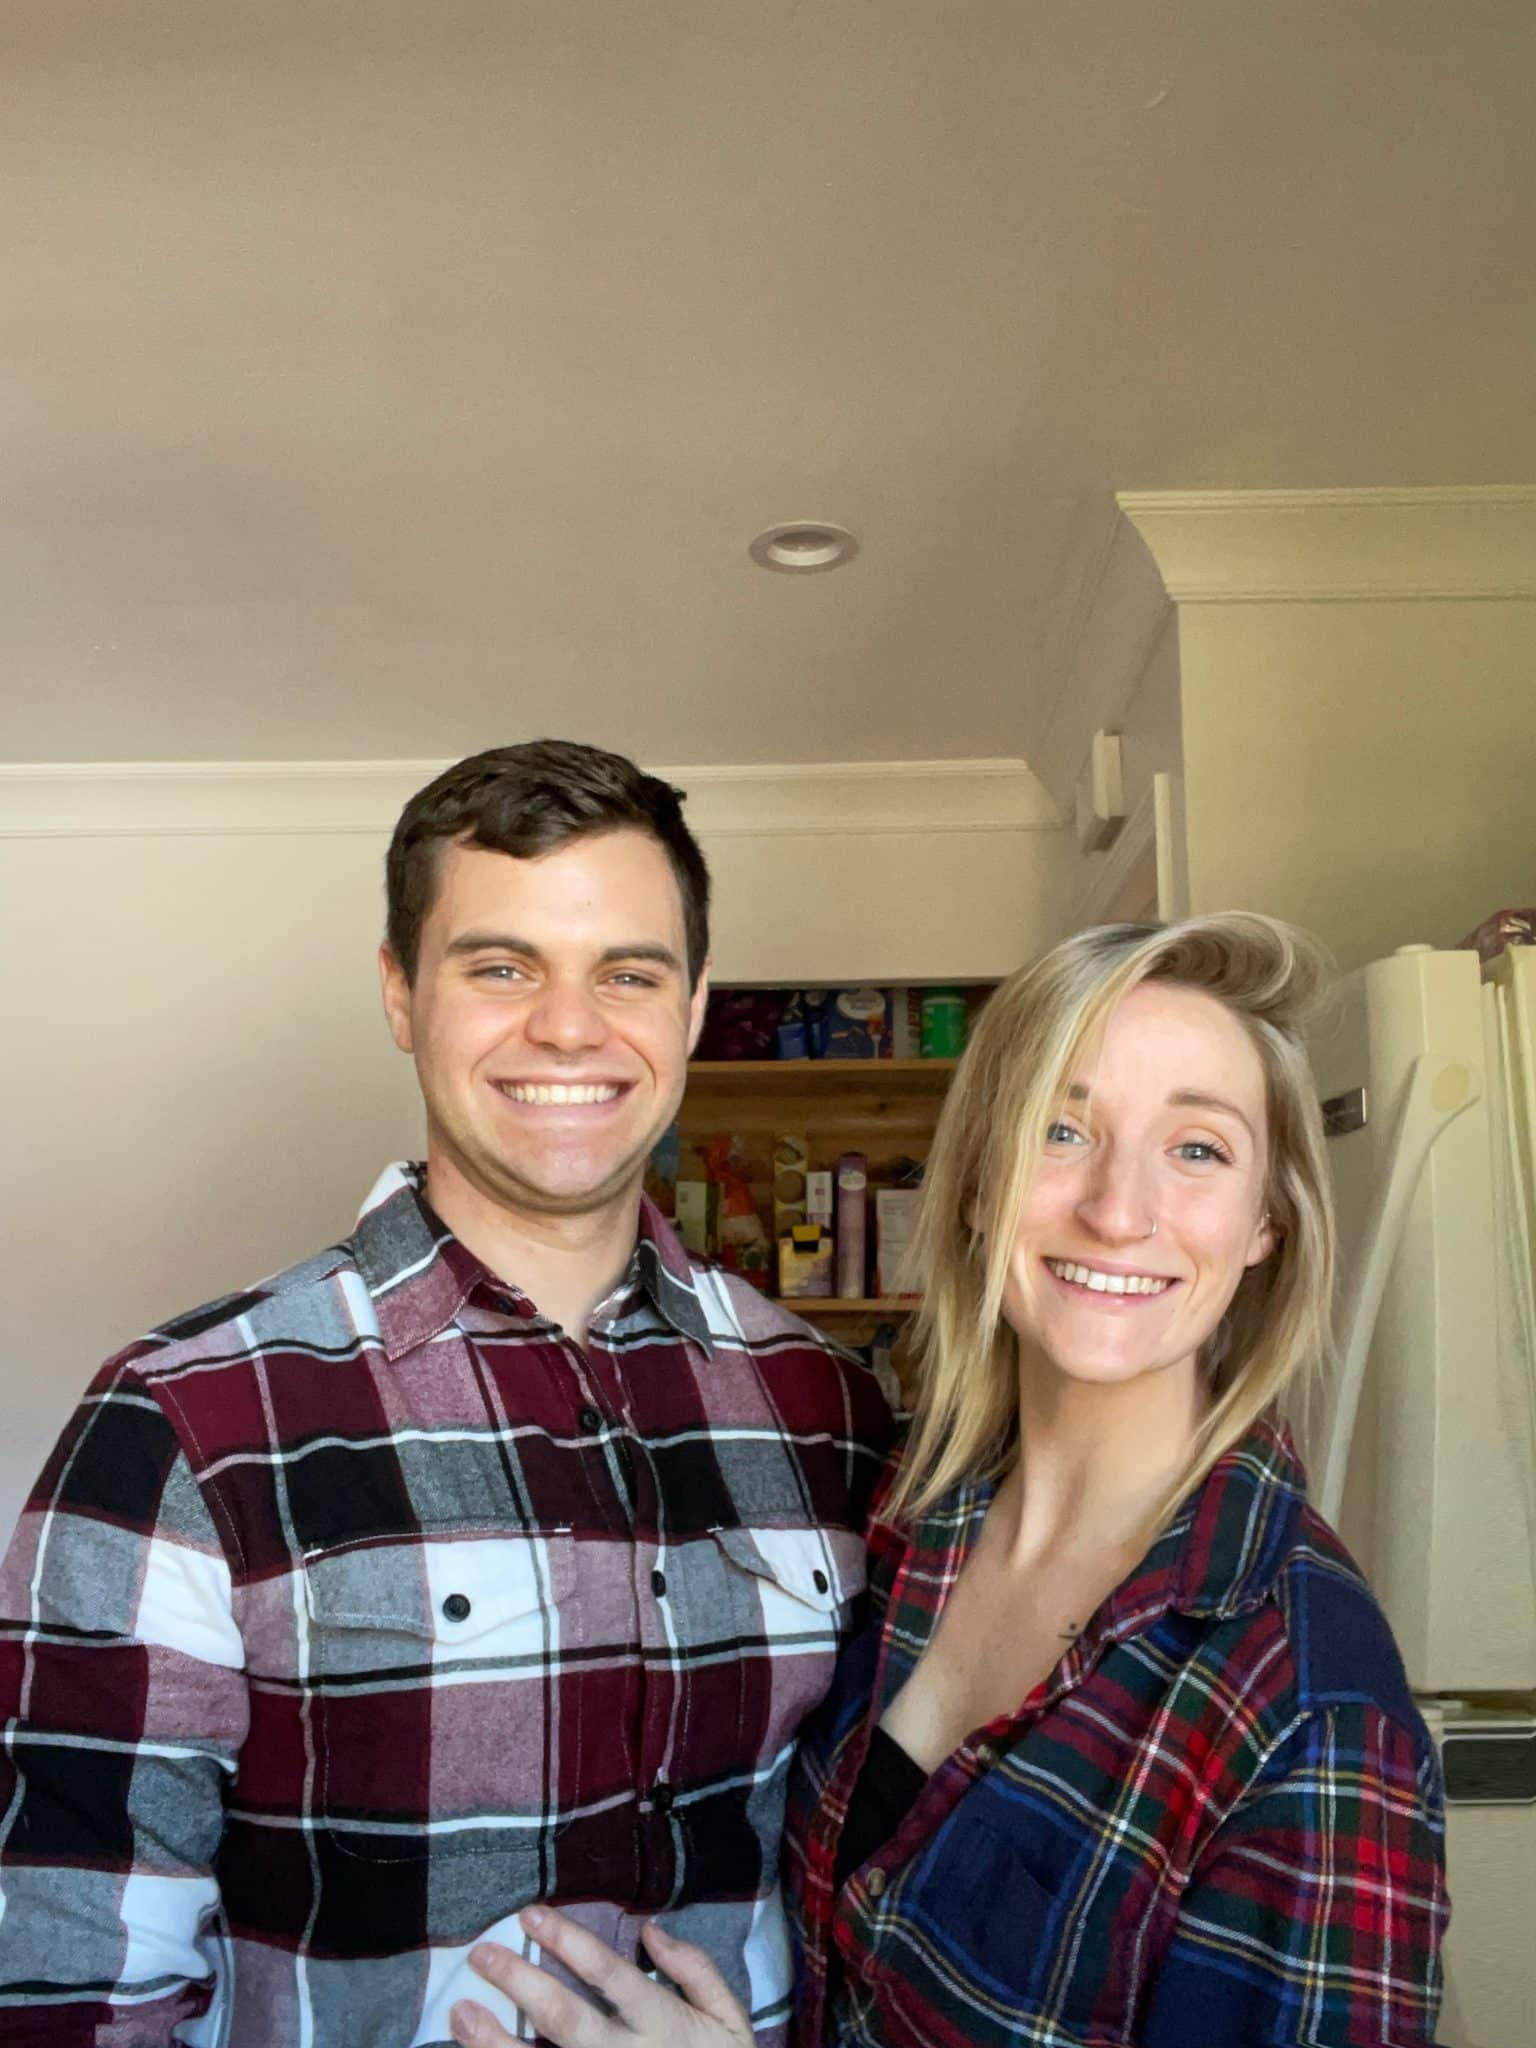 Couple wears matching red plaid shirts in photo together